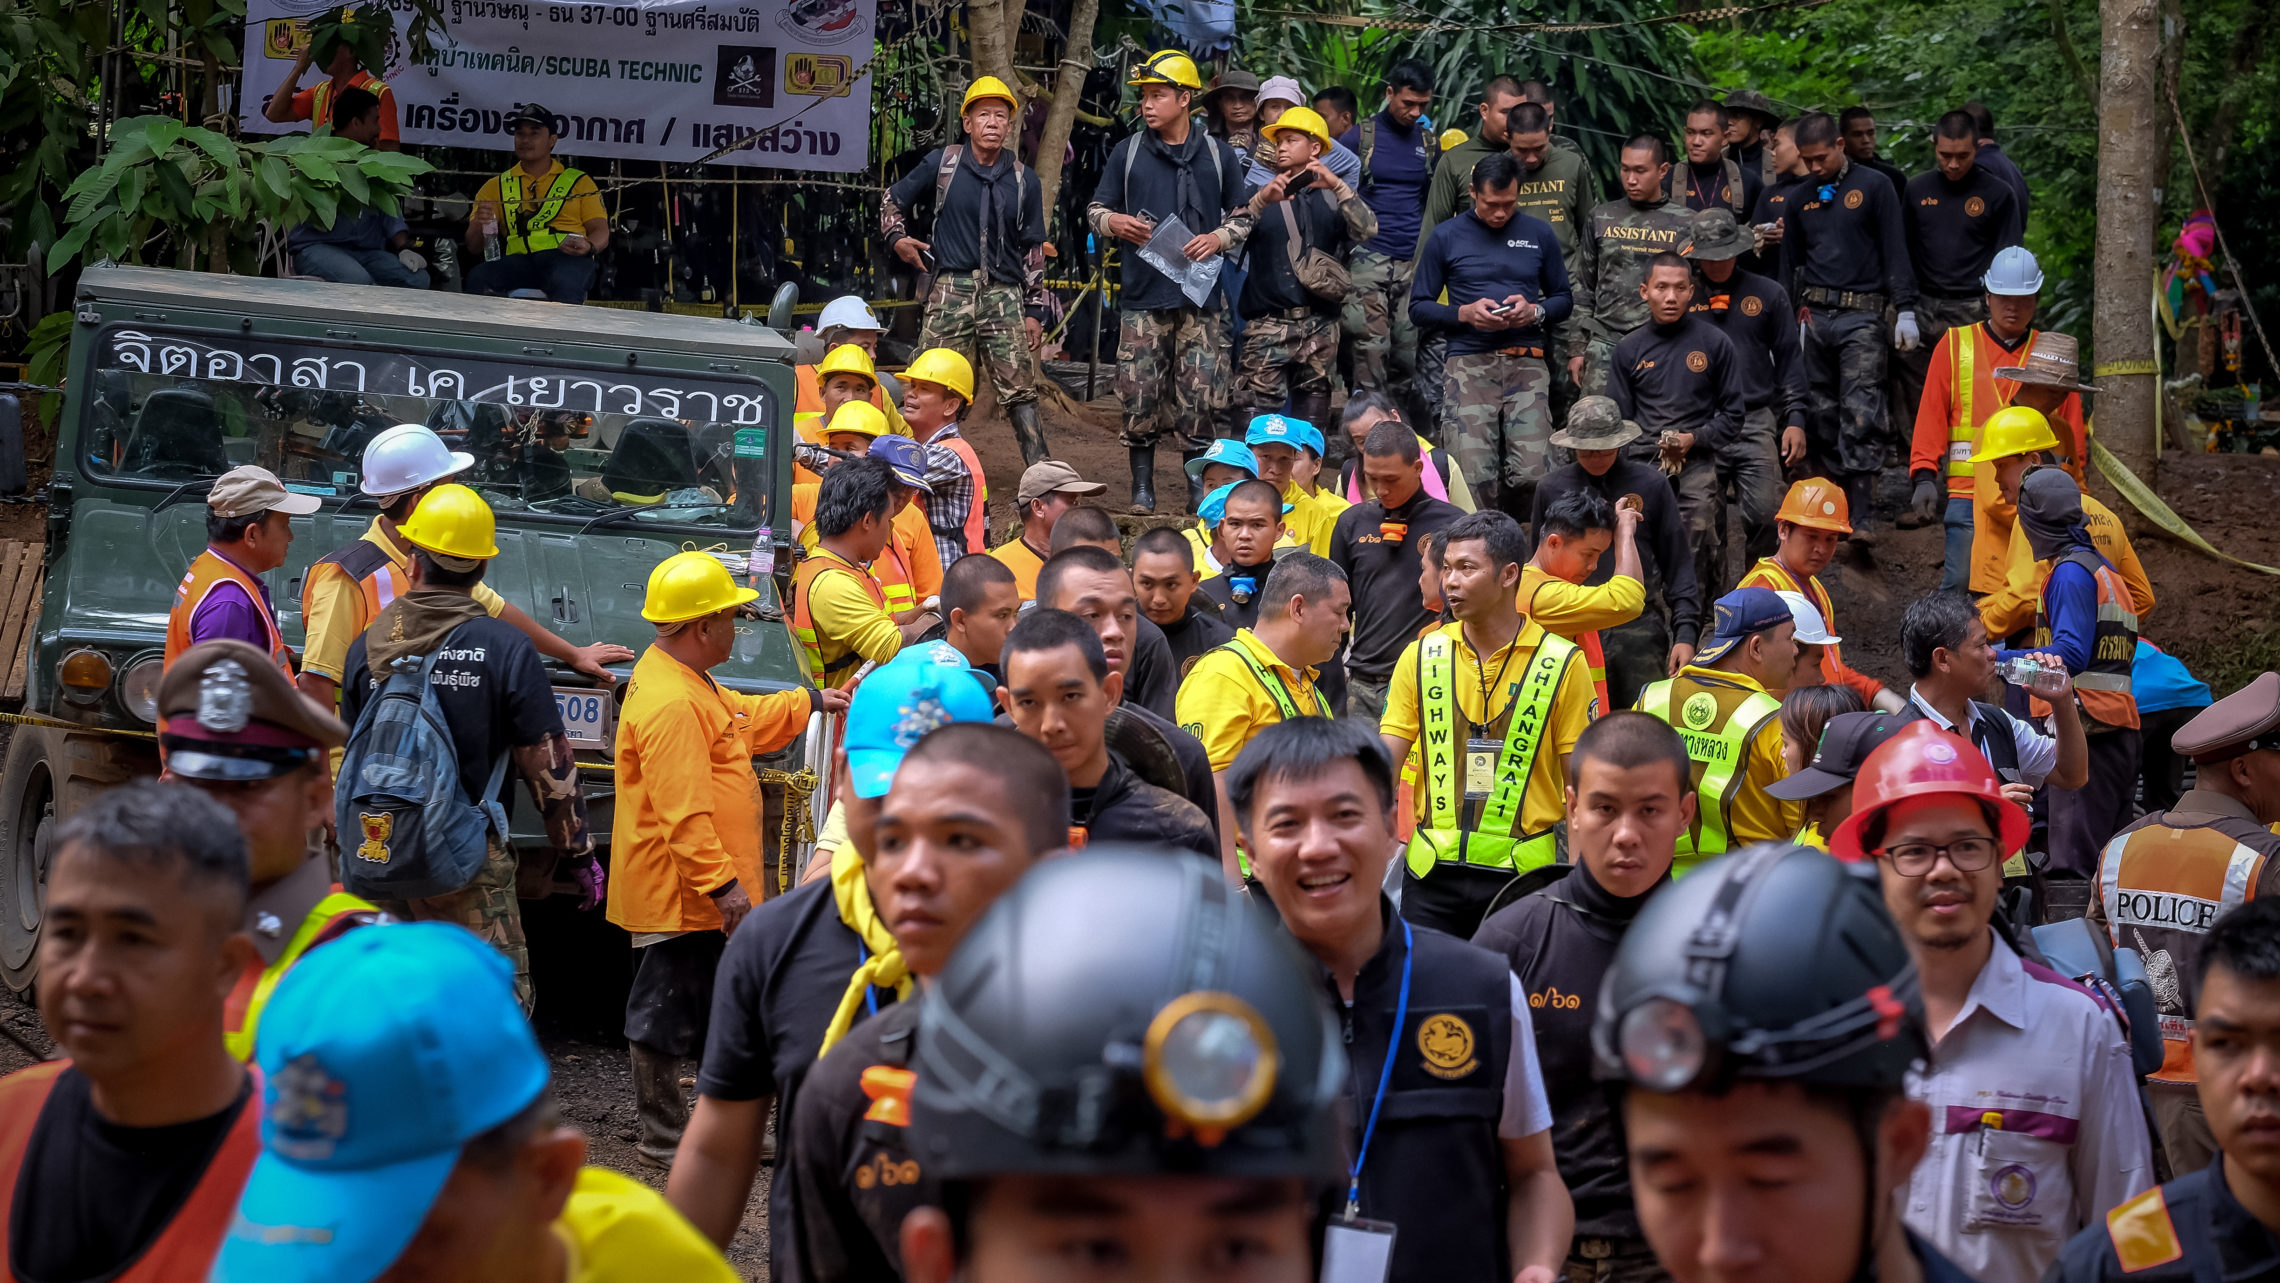 Hundreds of rescuers gather outside the cave Tuesday in Chiang Rai to help load equipment and aid efforts to rescue the 12 boys aged 11 to 16 and their 25-year-old coach. CREDIT: LINH PHAM